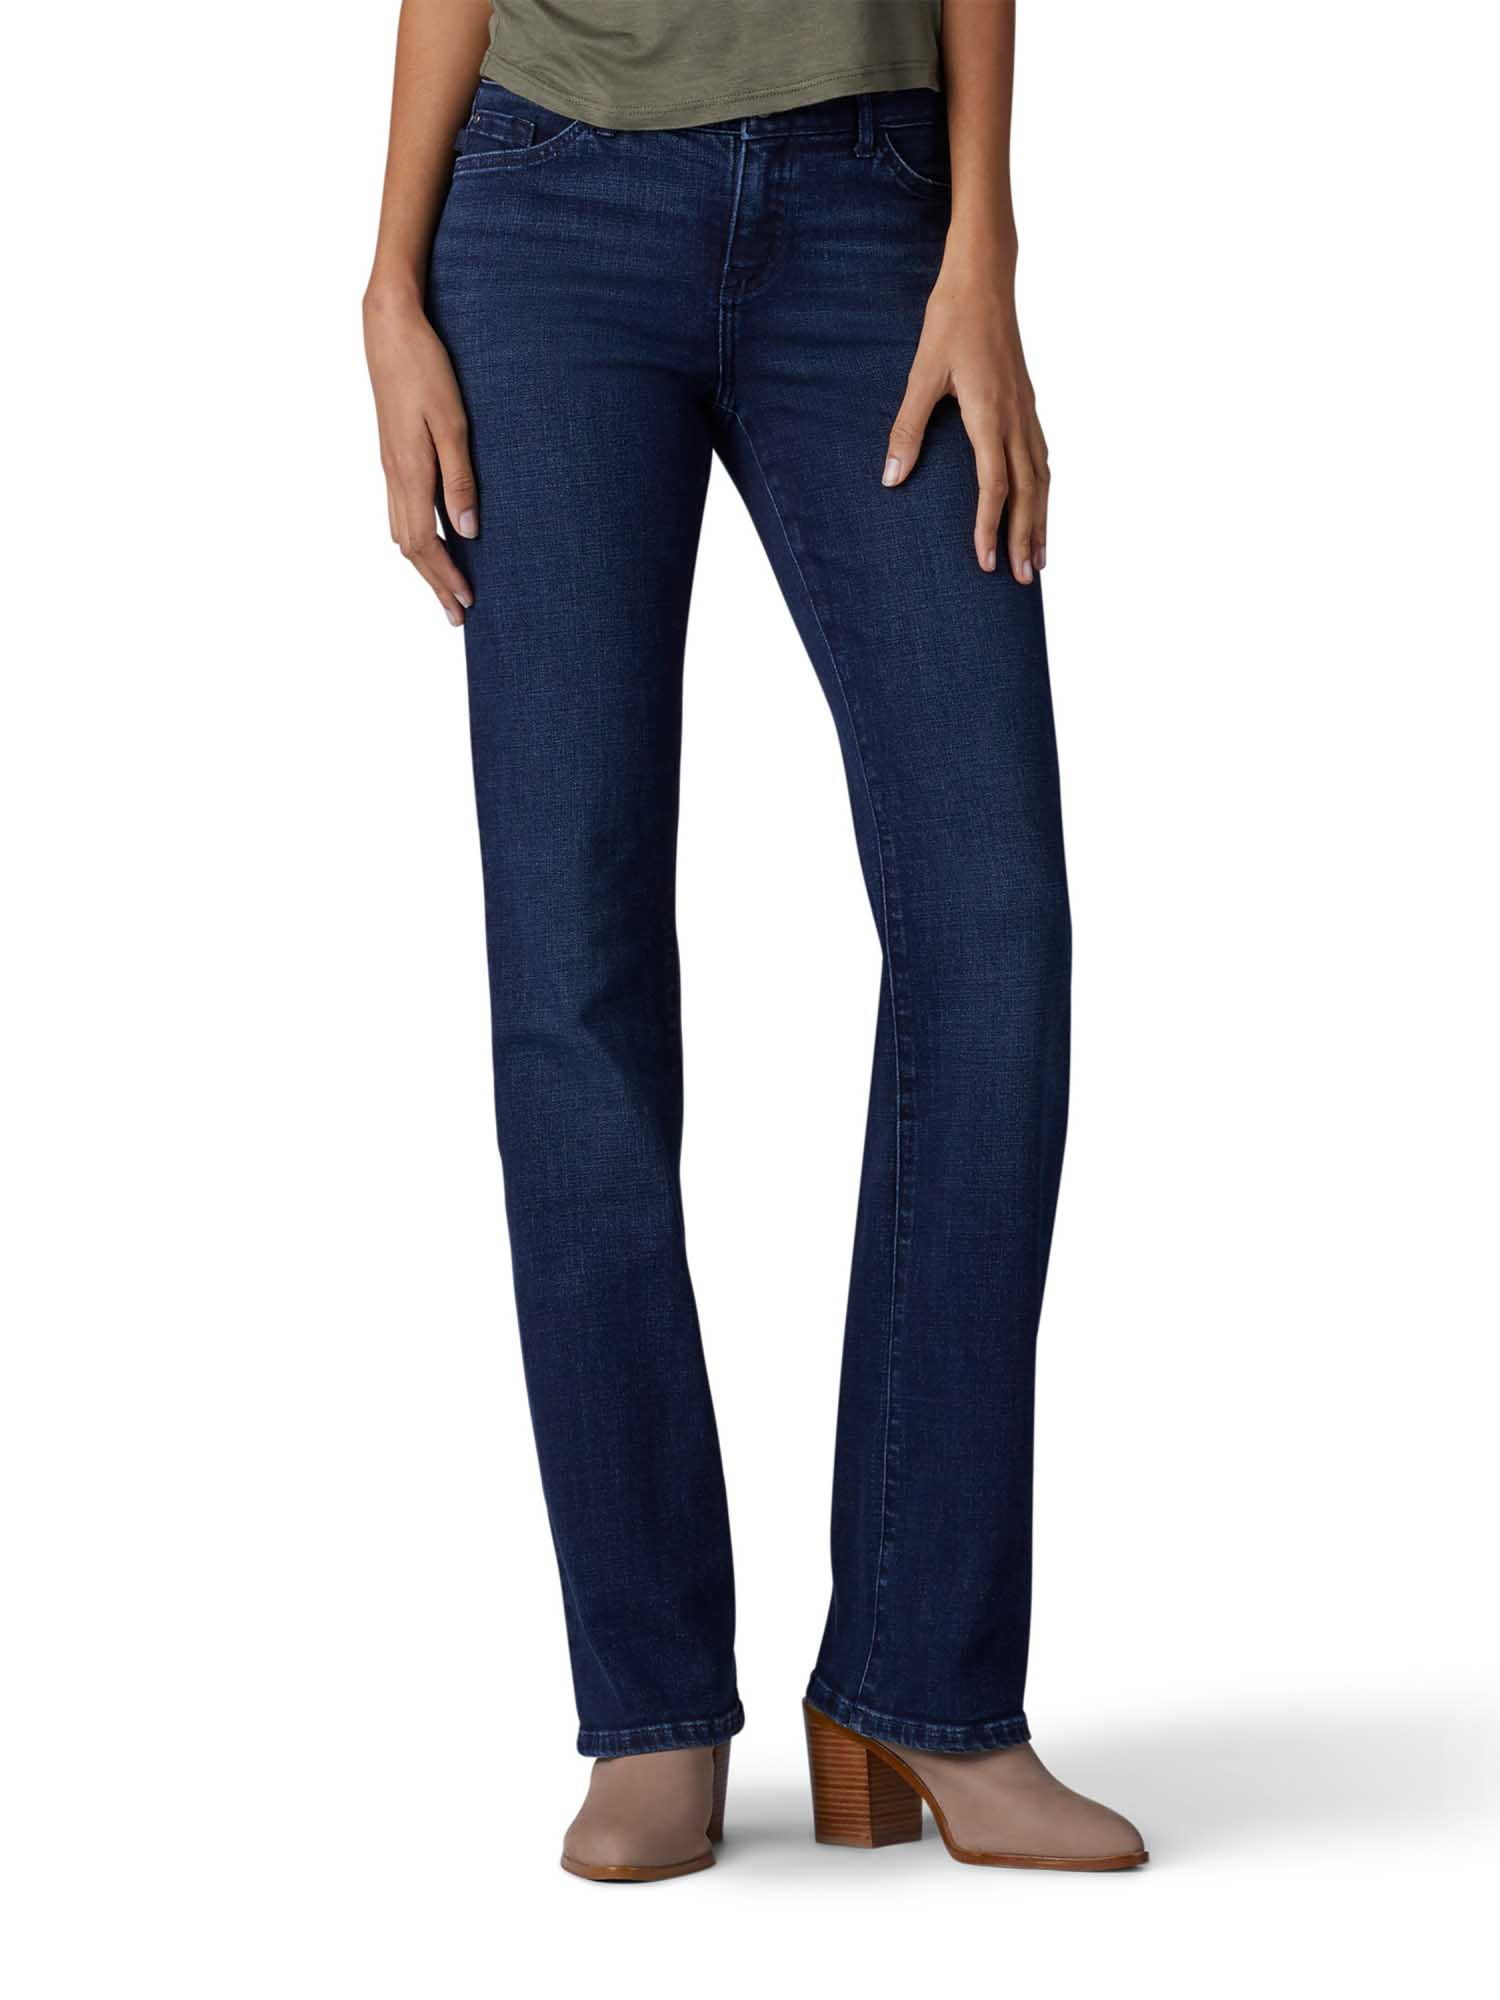 NWT WOMENS LEE MIDRISE FIT BARELY BOOTCUT STRETCH JEANS $54 353323 VINTAGE BLUE 